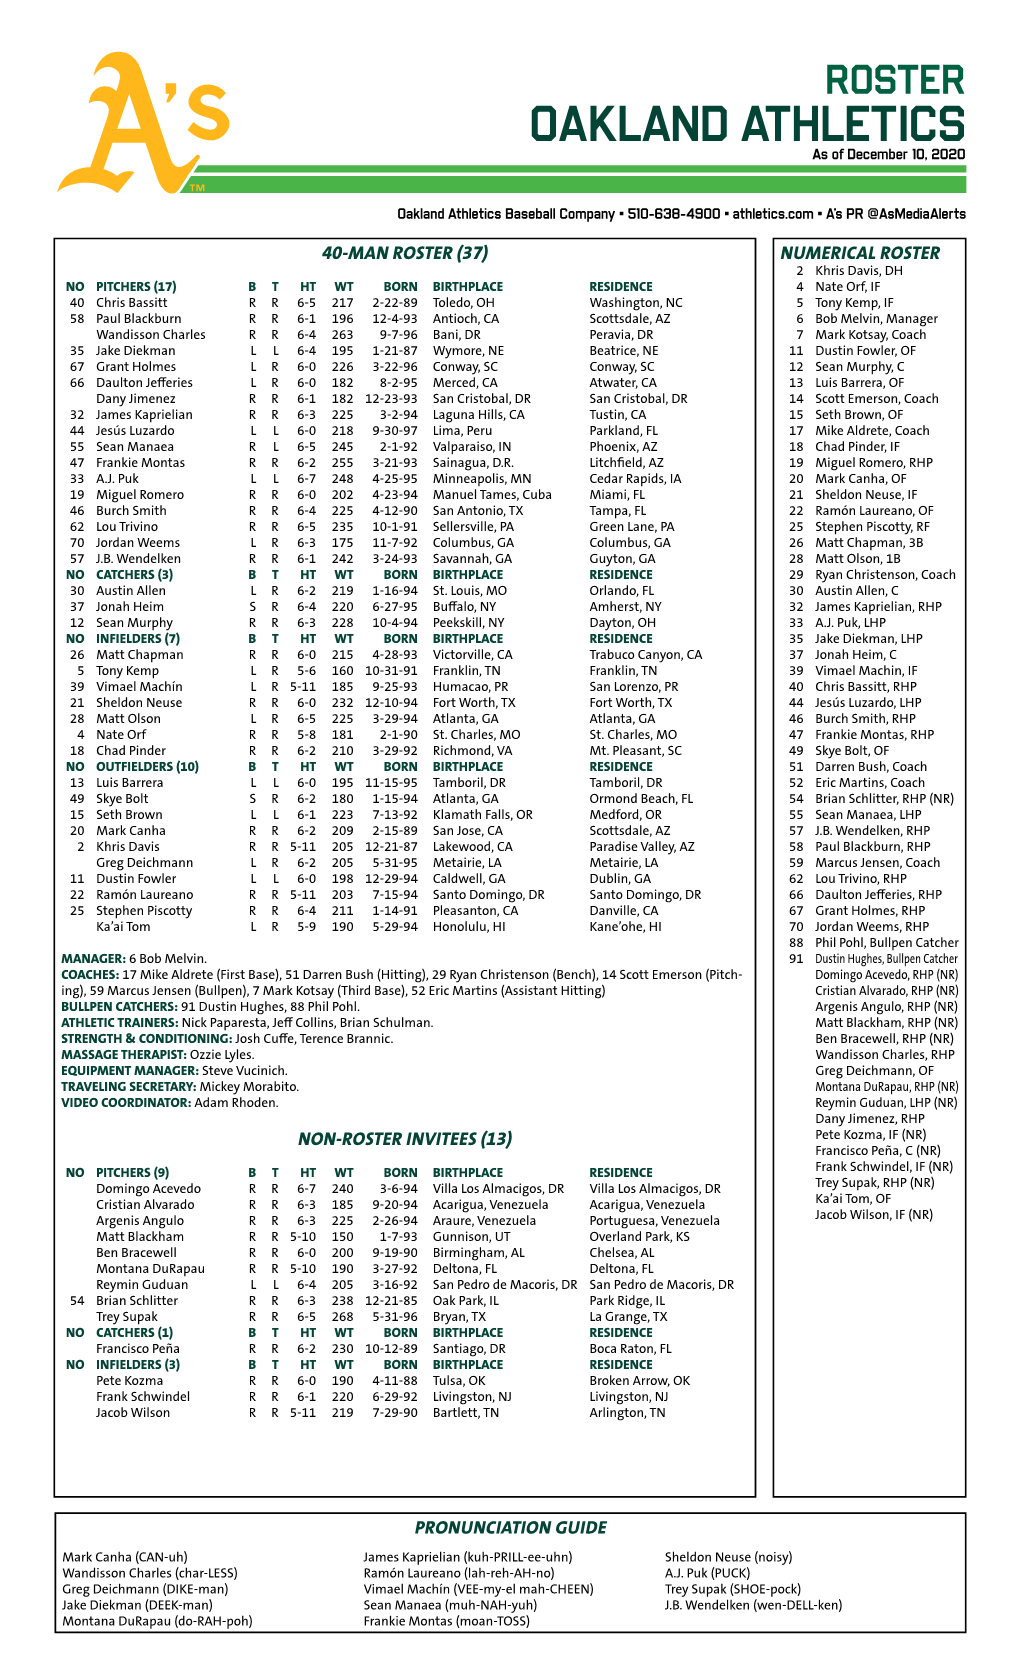 12-10-2020 A's Roster